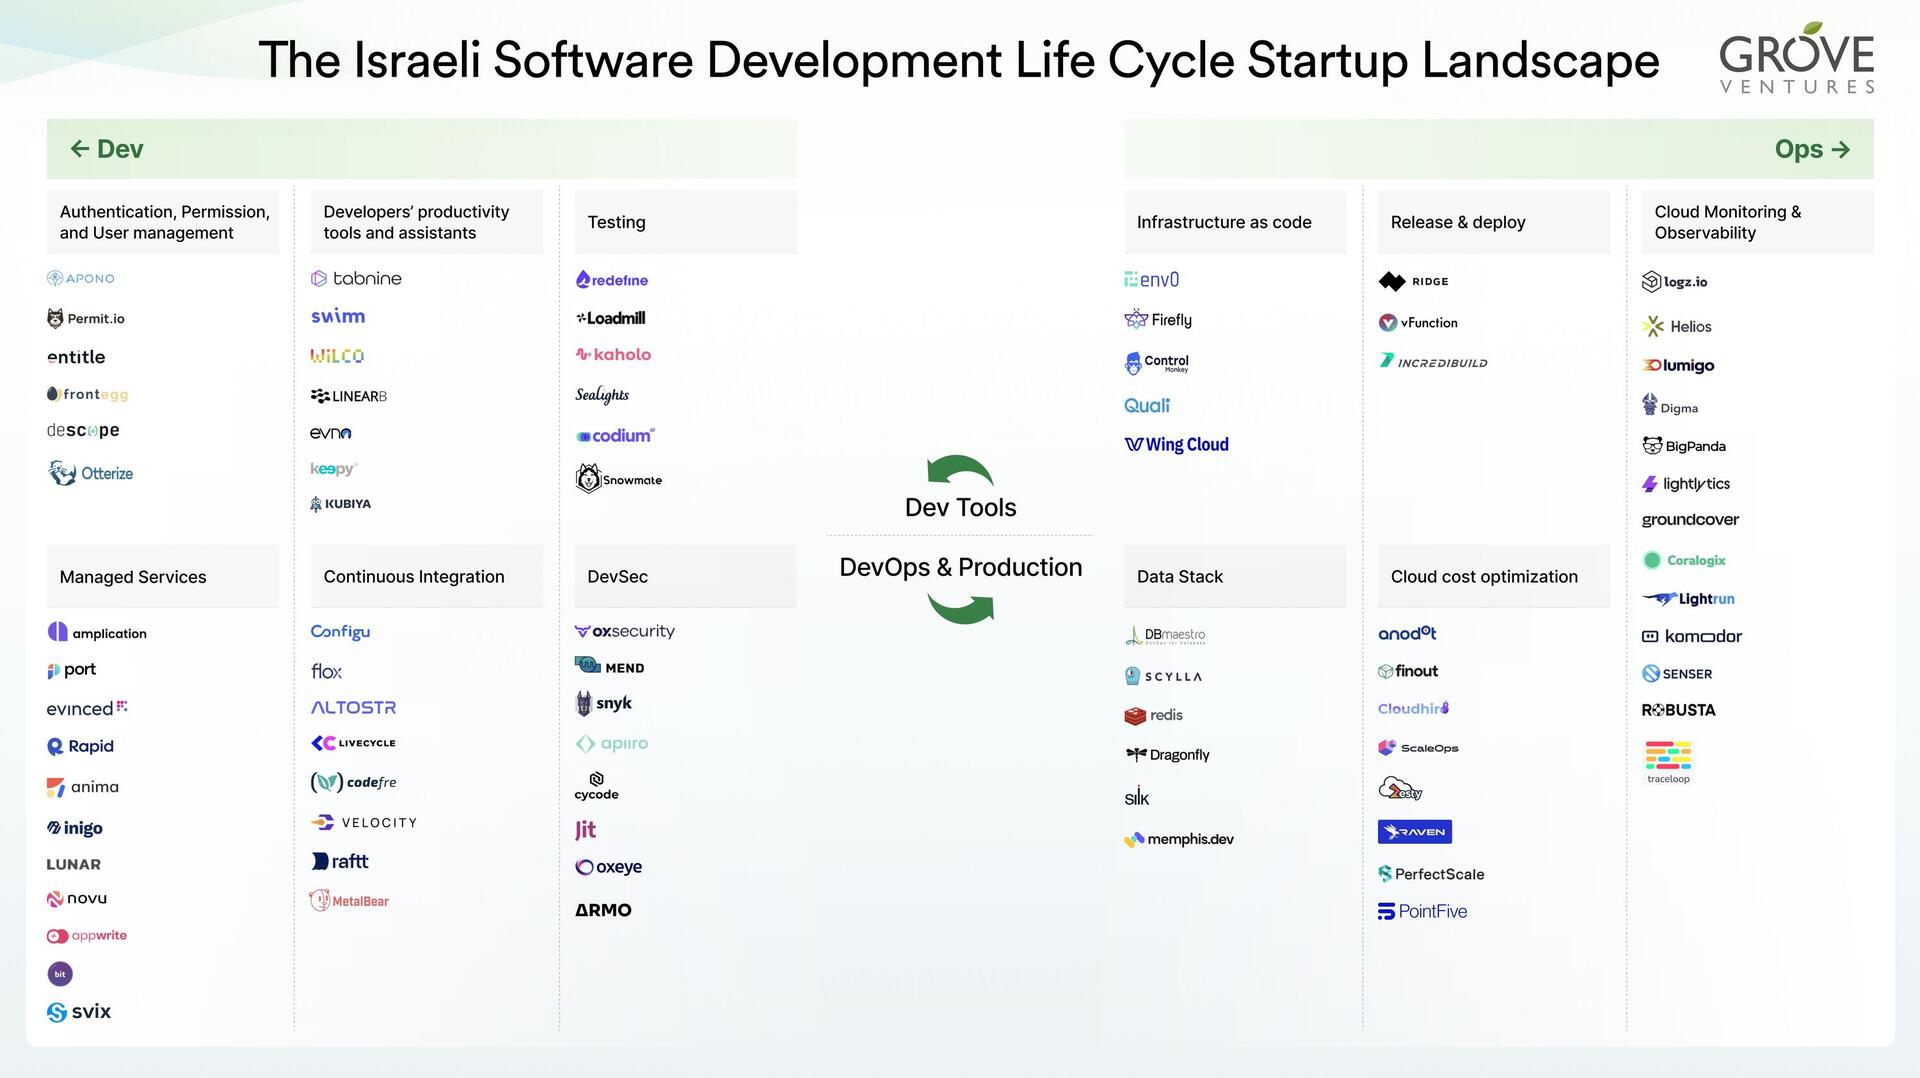 Software Development Life Cycle Startup Landscape